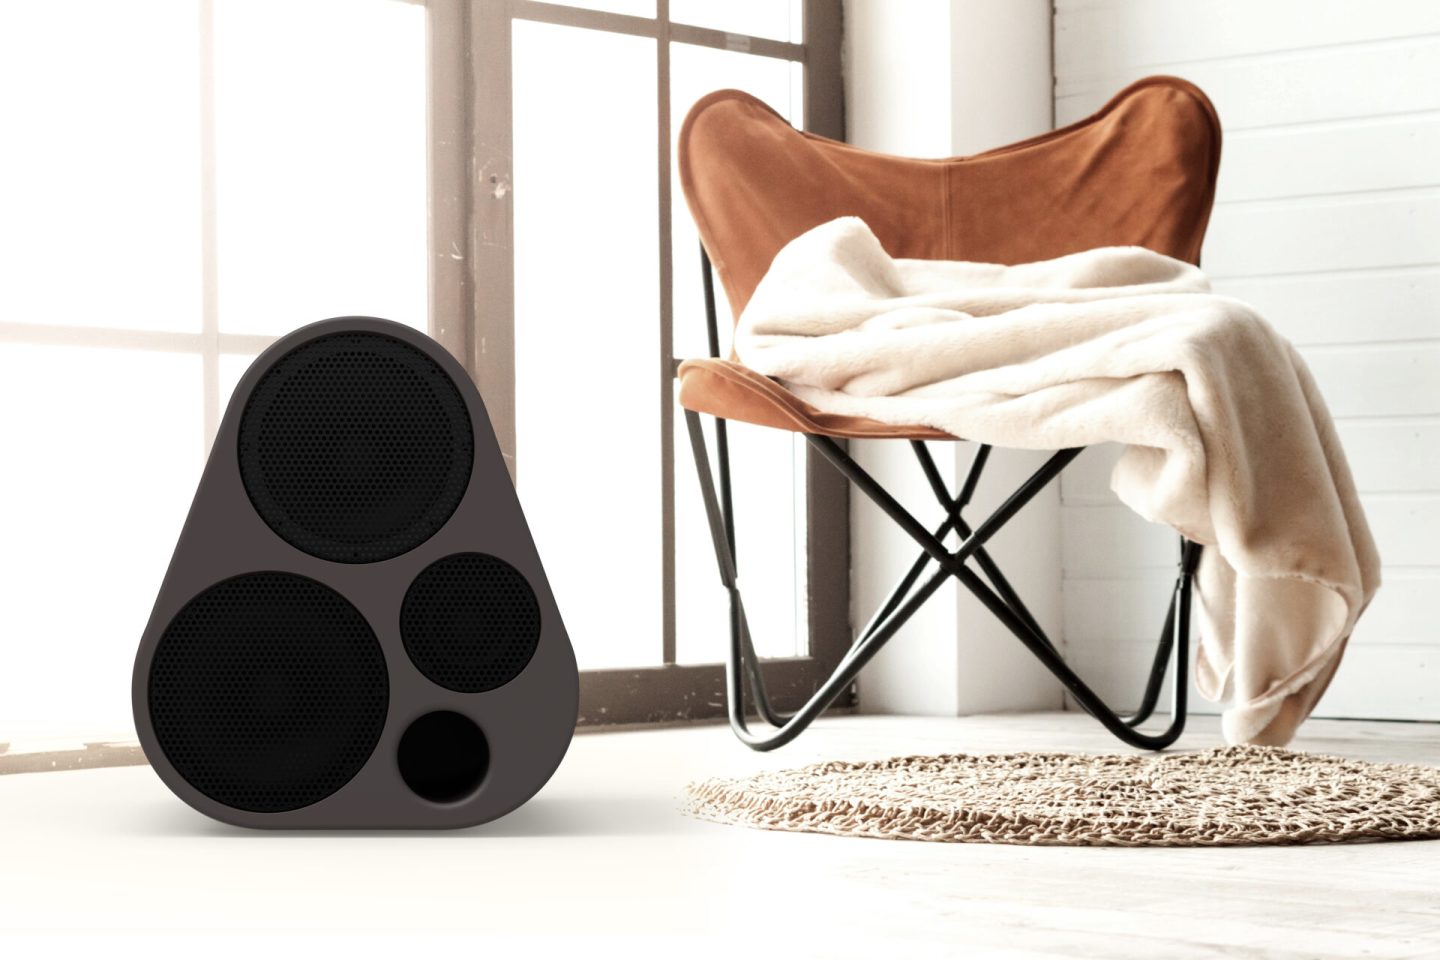 Stylish enough for indoor use, portable and loud enough for the great outdoors